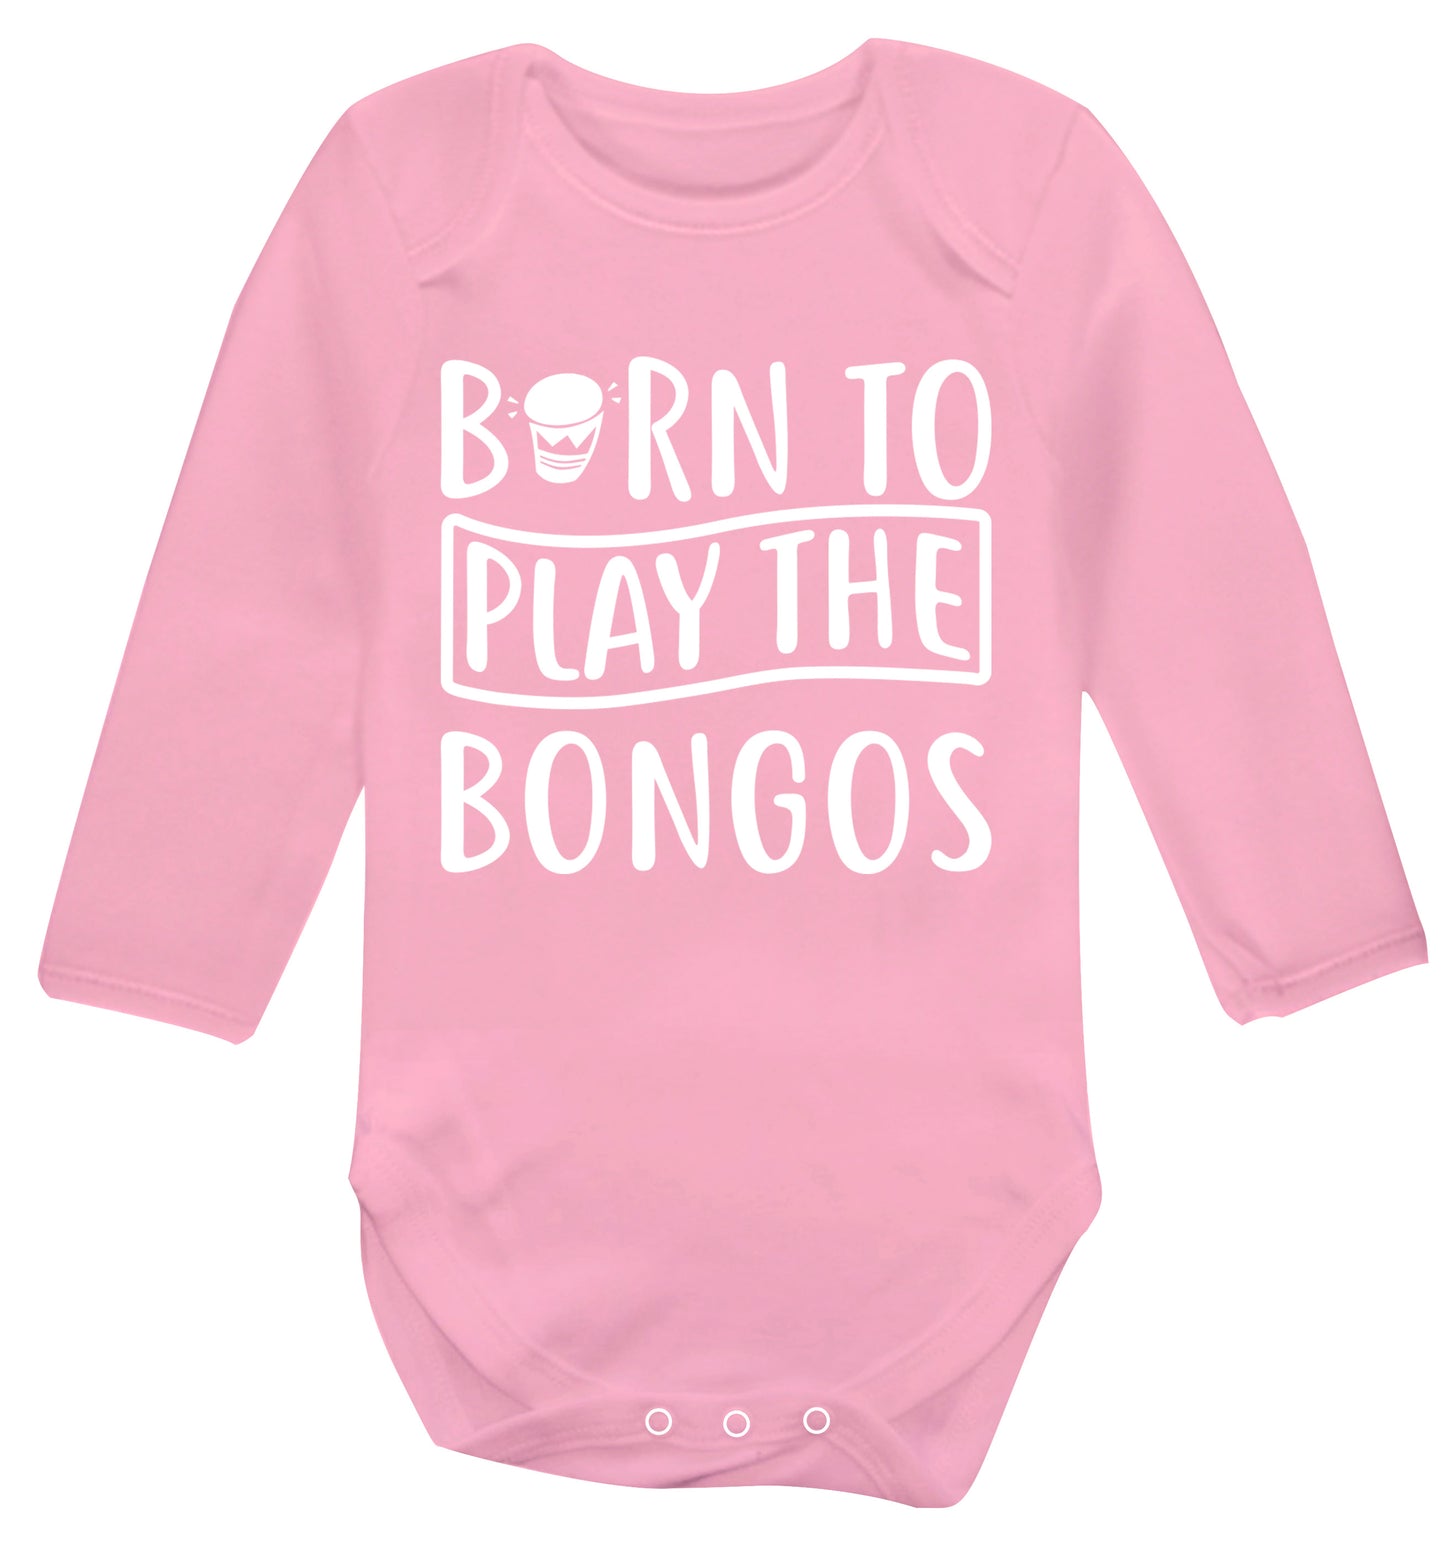 Born to play the bongos Baby Vest long sleeved pale pink 6-12 months